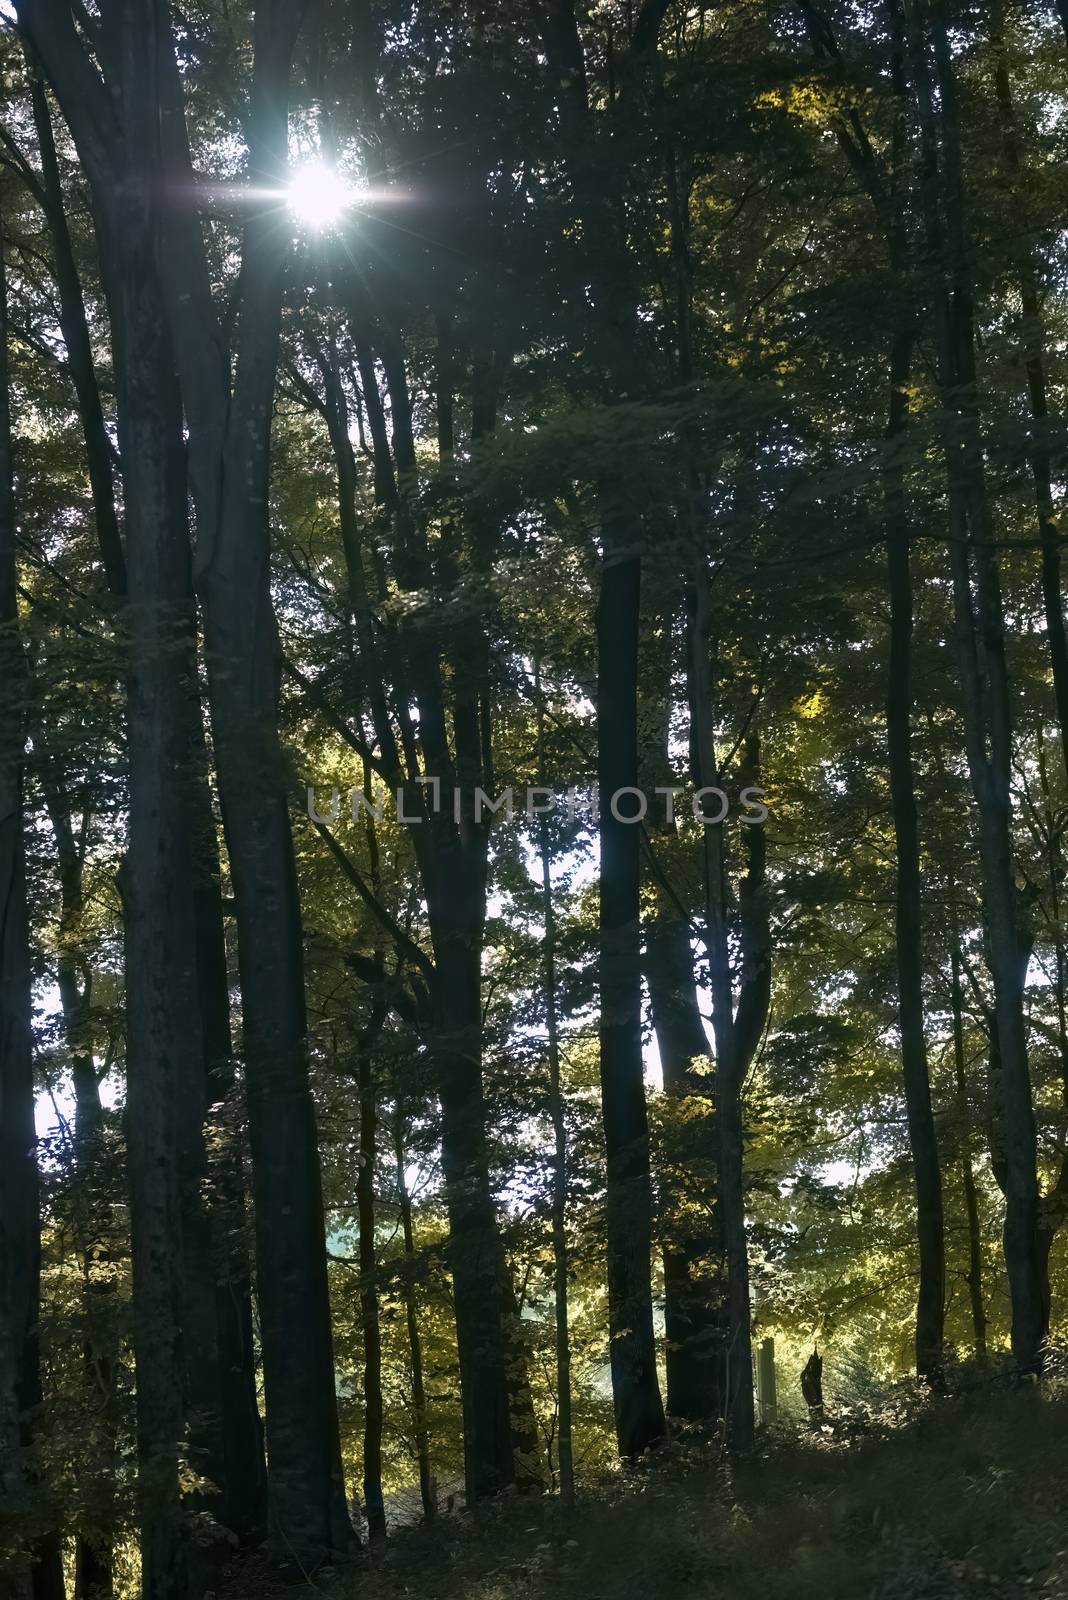 Evening sunlight filters through the forest canopy at Elk Knob State Park in Ashe County, NC.